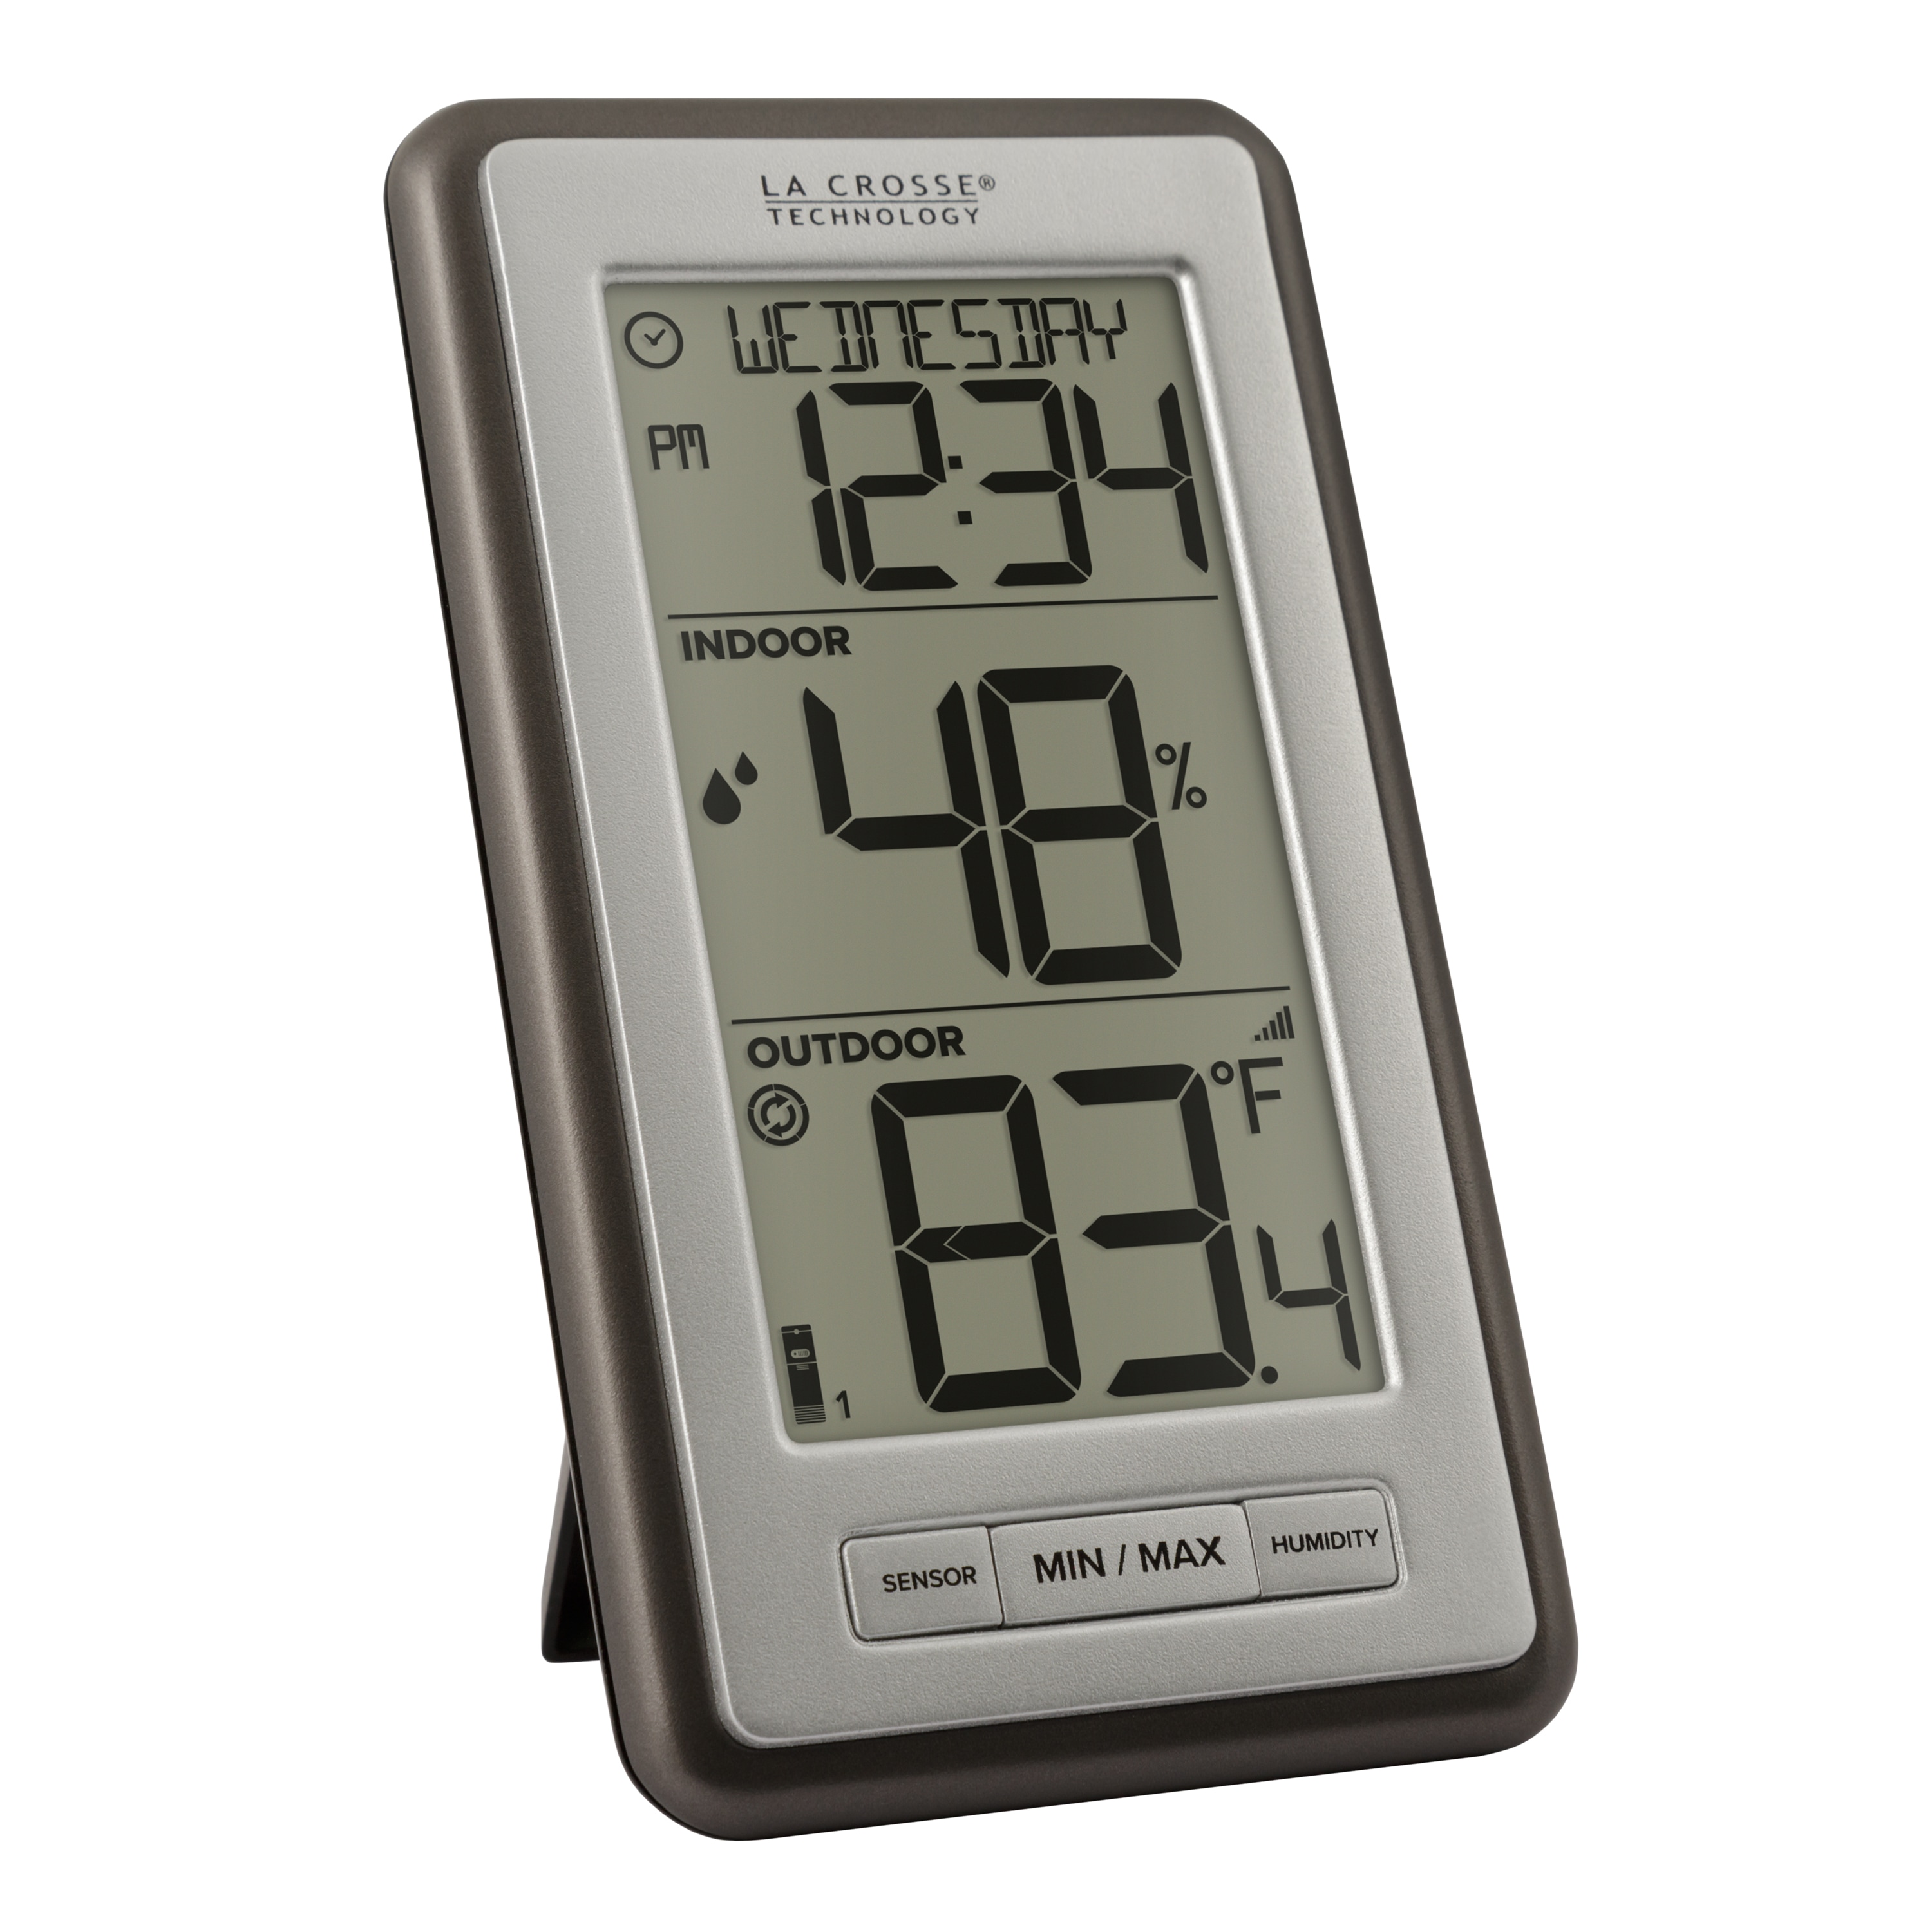 La Crosse Technology 331-09667-INT Wireless Pool Thermometer with Indoor LCD Display